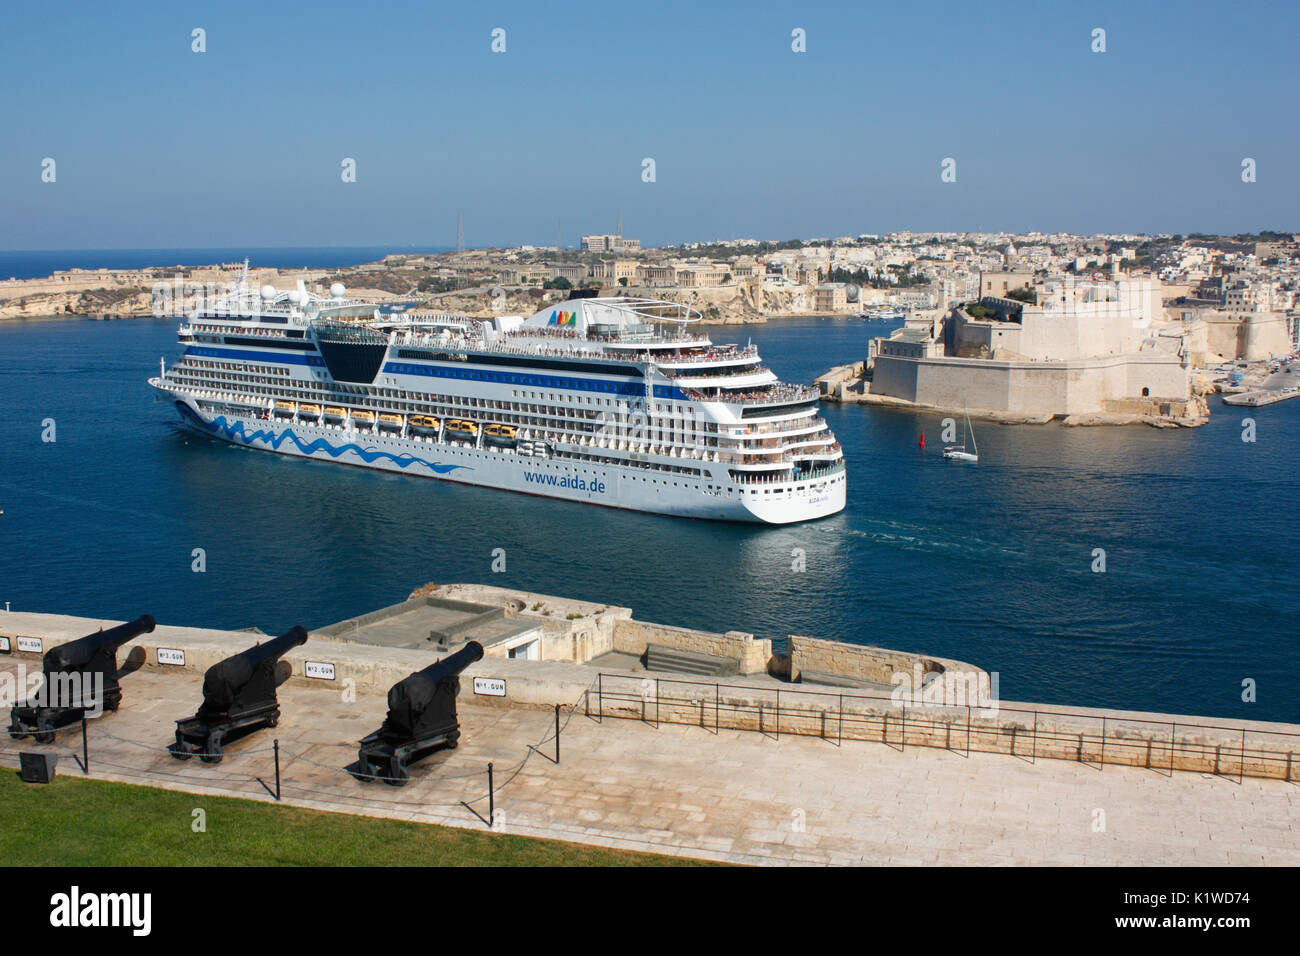 Mediterranean travel and tourism. The cruise ship or liner AIDAstella departing from the Grand Harbour in Malta Stock Photo